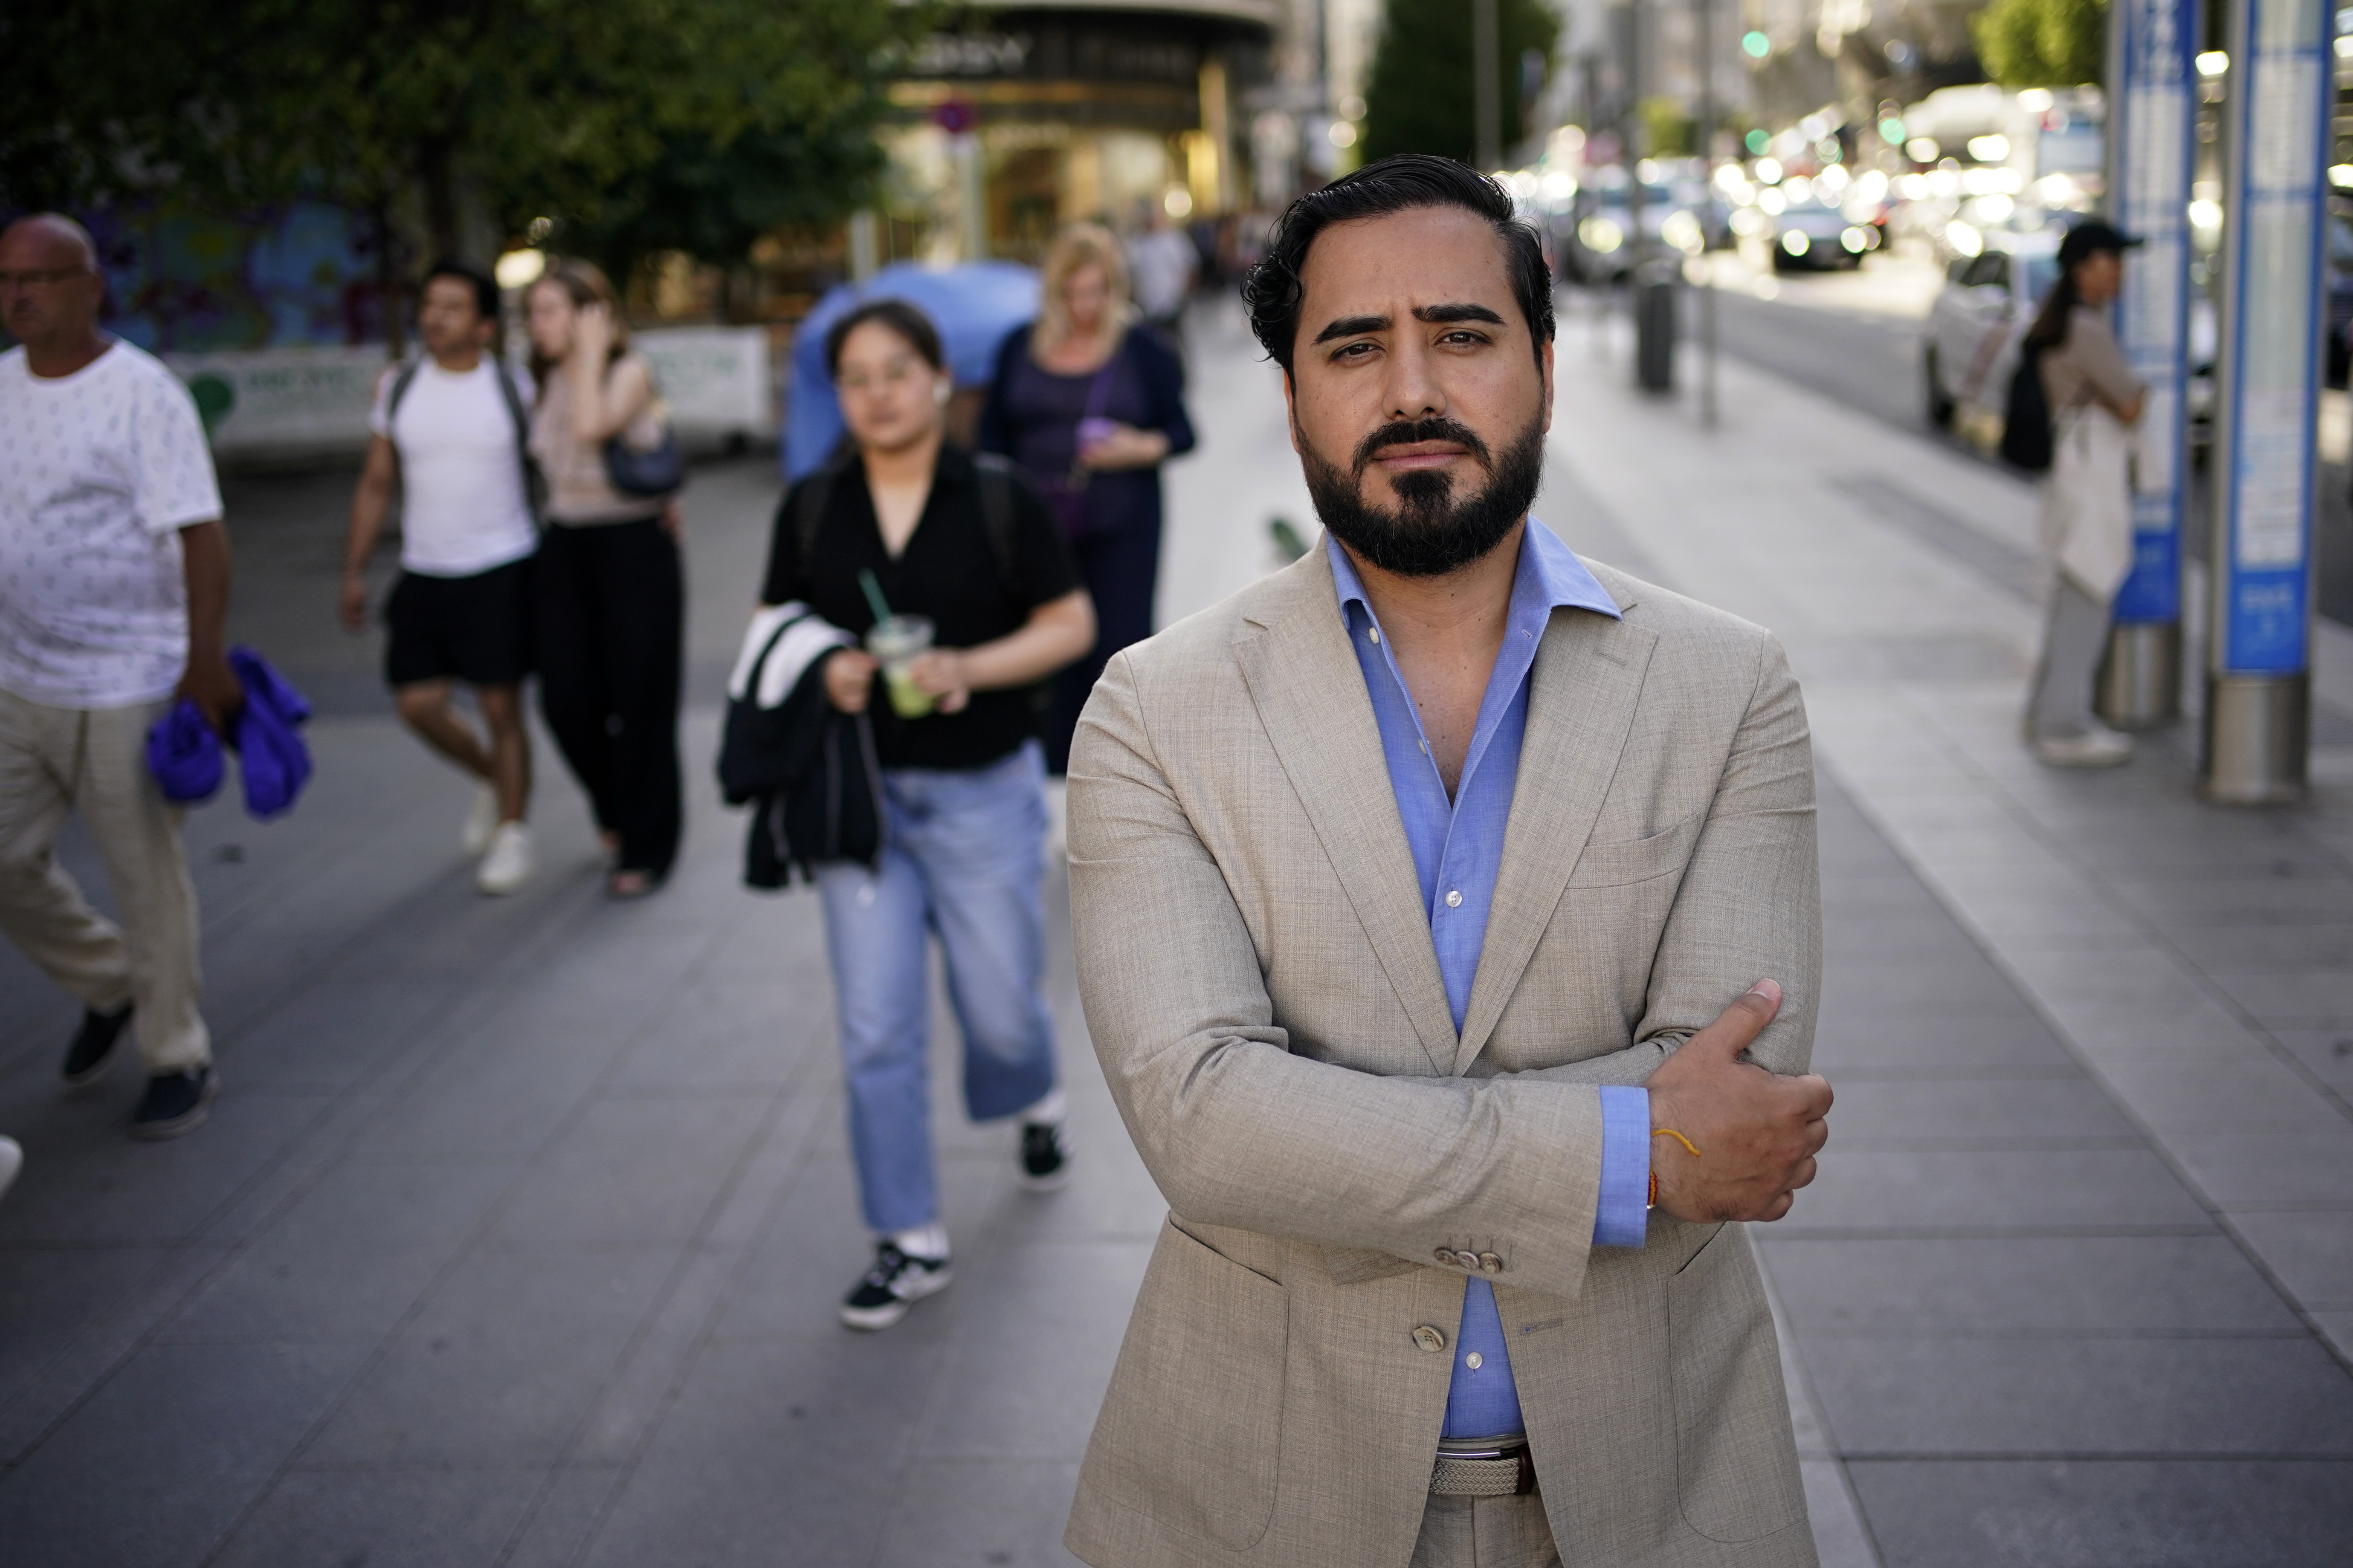 Alvise Perez, leader of "The Party Is Over" ("Se acabó la fiesta") poses for a photo in Madrid, Spain, Thursday, June 13, 2024. One is a wildly popular, seemingly happy-go-lucky YouTuber with no political experience from Cyprus. The other is a brash, fringe figure of Spain's far right who rails against unauthorized immigrants. They are now new members of the European Parliament thanks to their savvy use of the potential of video-based social media. (AP Photo/Andrea Comas)